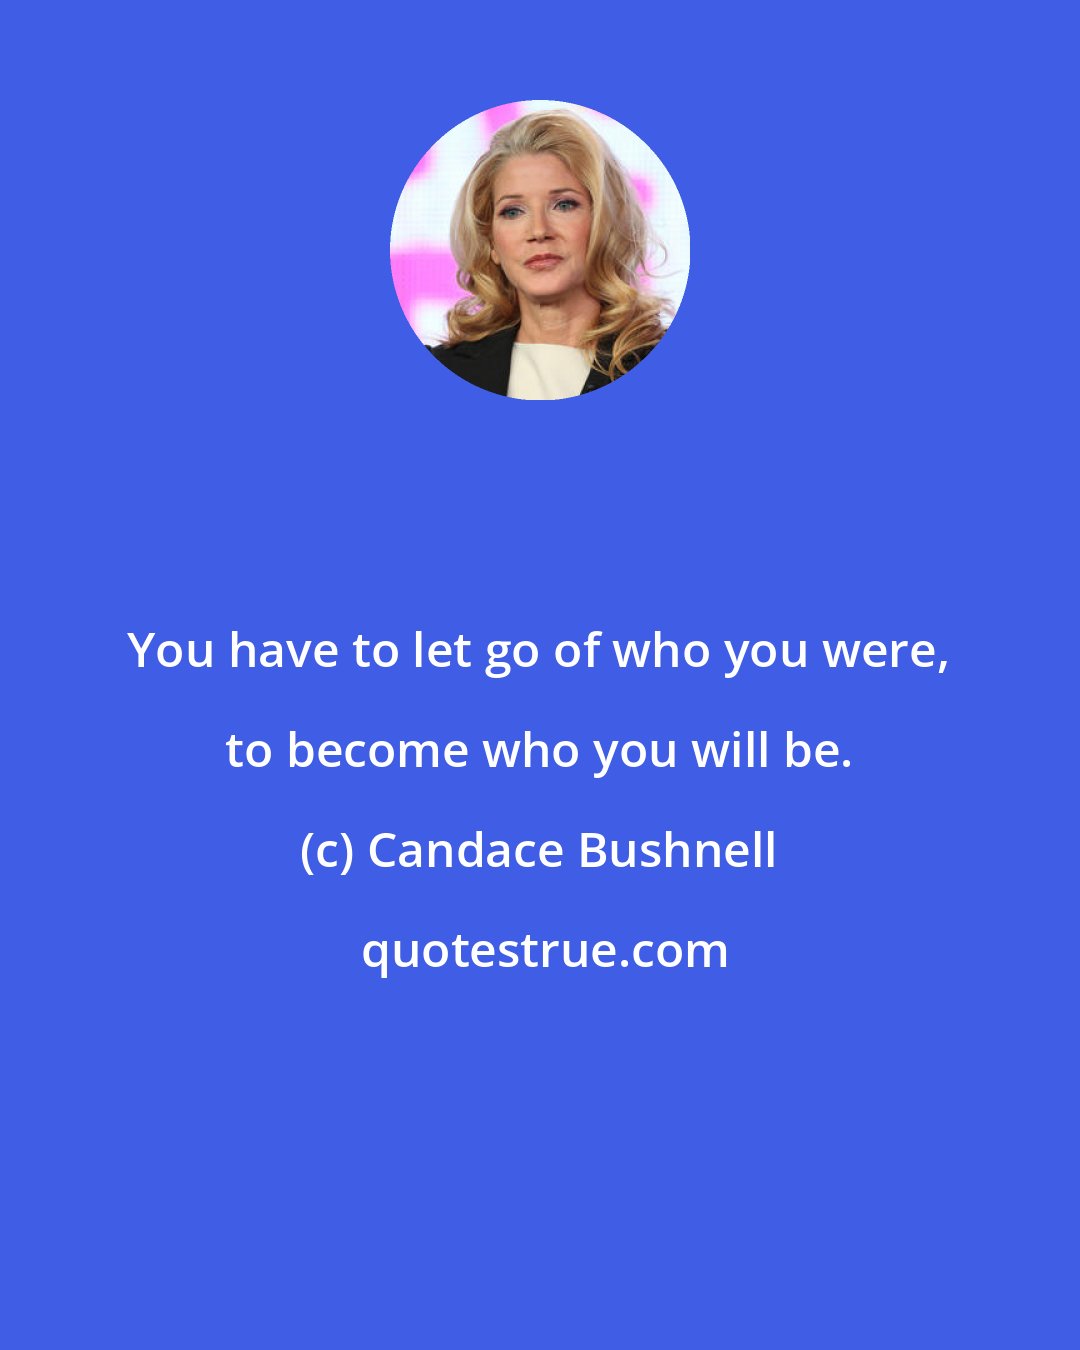 Candace Bushnell: You have to let go of who you were, to become who you will be.